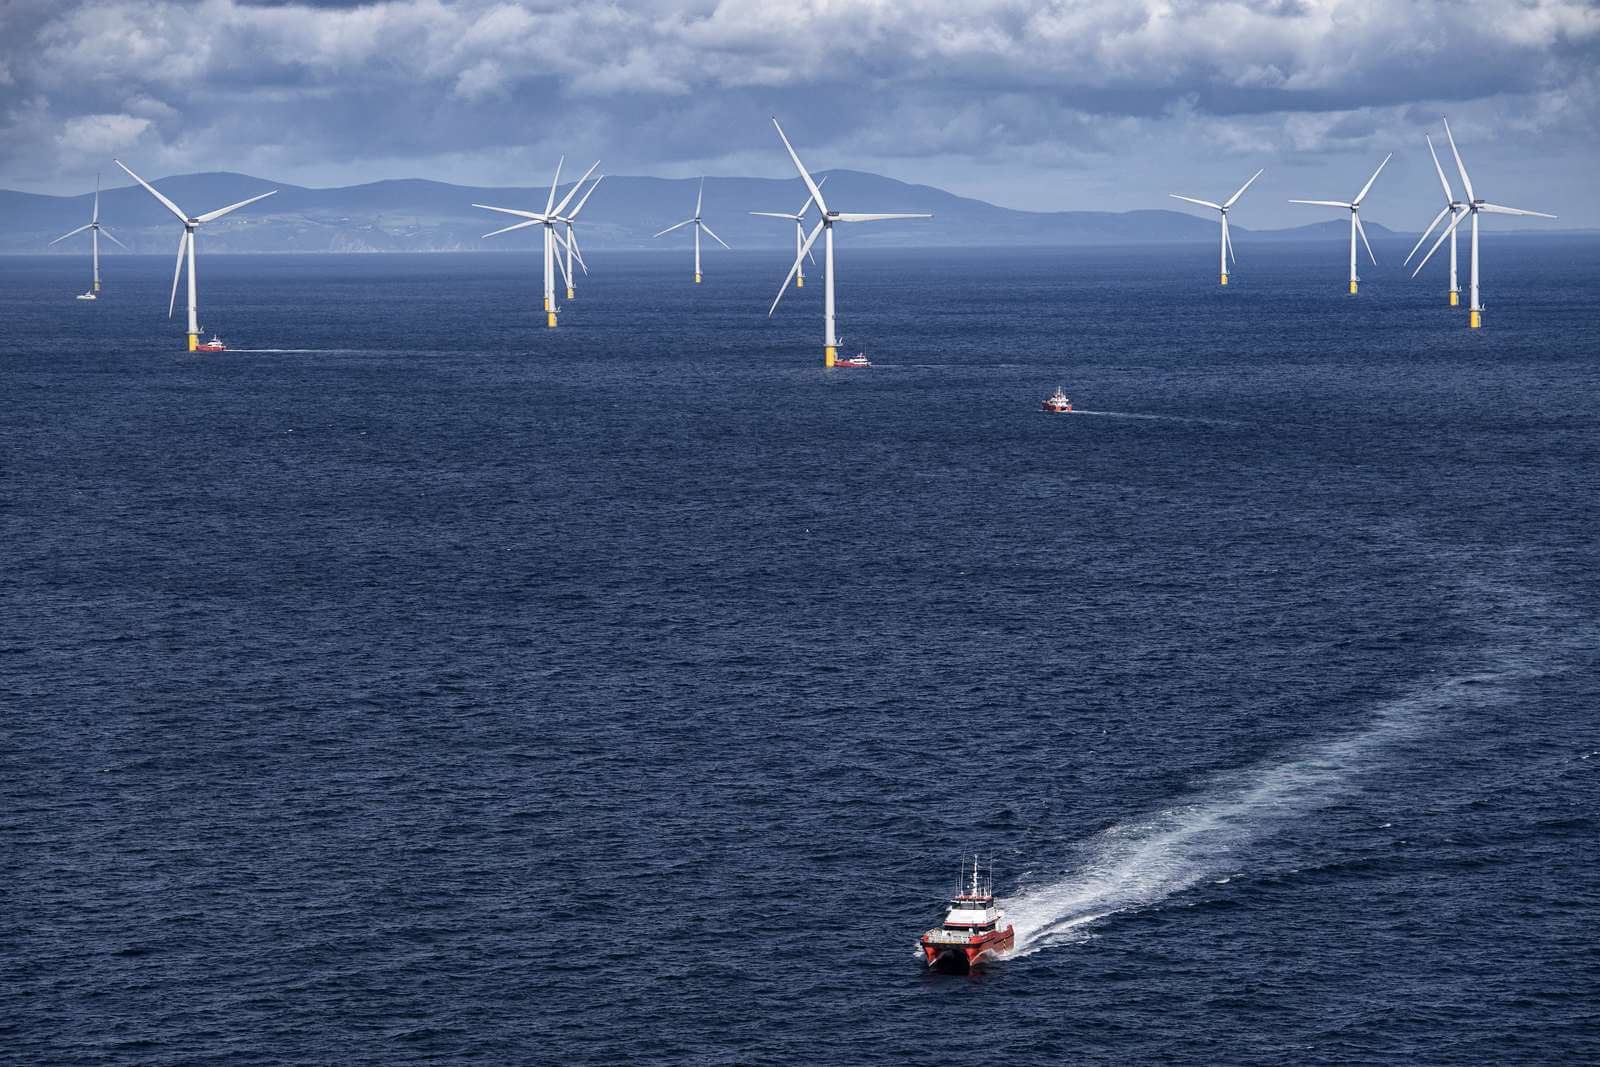 Offshore wind project provide unique challenges for developers relating to environmental and siting regulations, offshore transportation and worker safety, weather conditions, and wind-farm uptime. It is important to seek the advice of a qualified underwriter to mitigate project and insurance risks. 